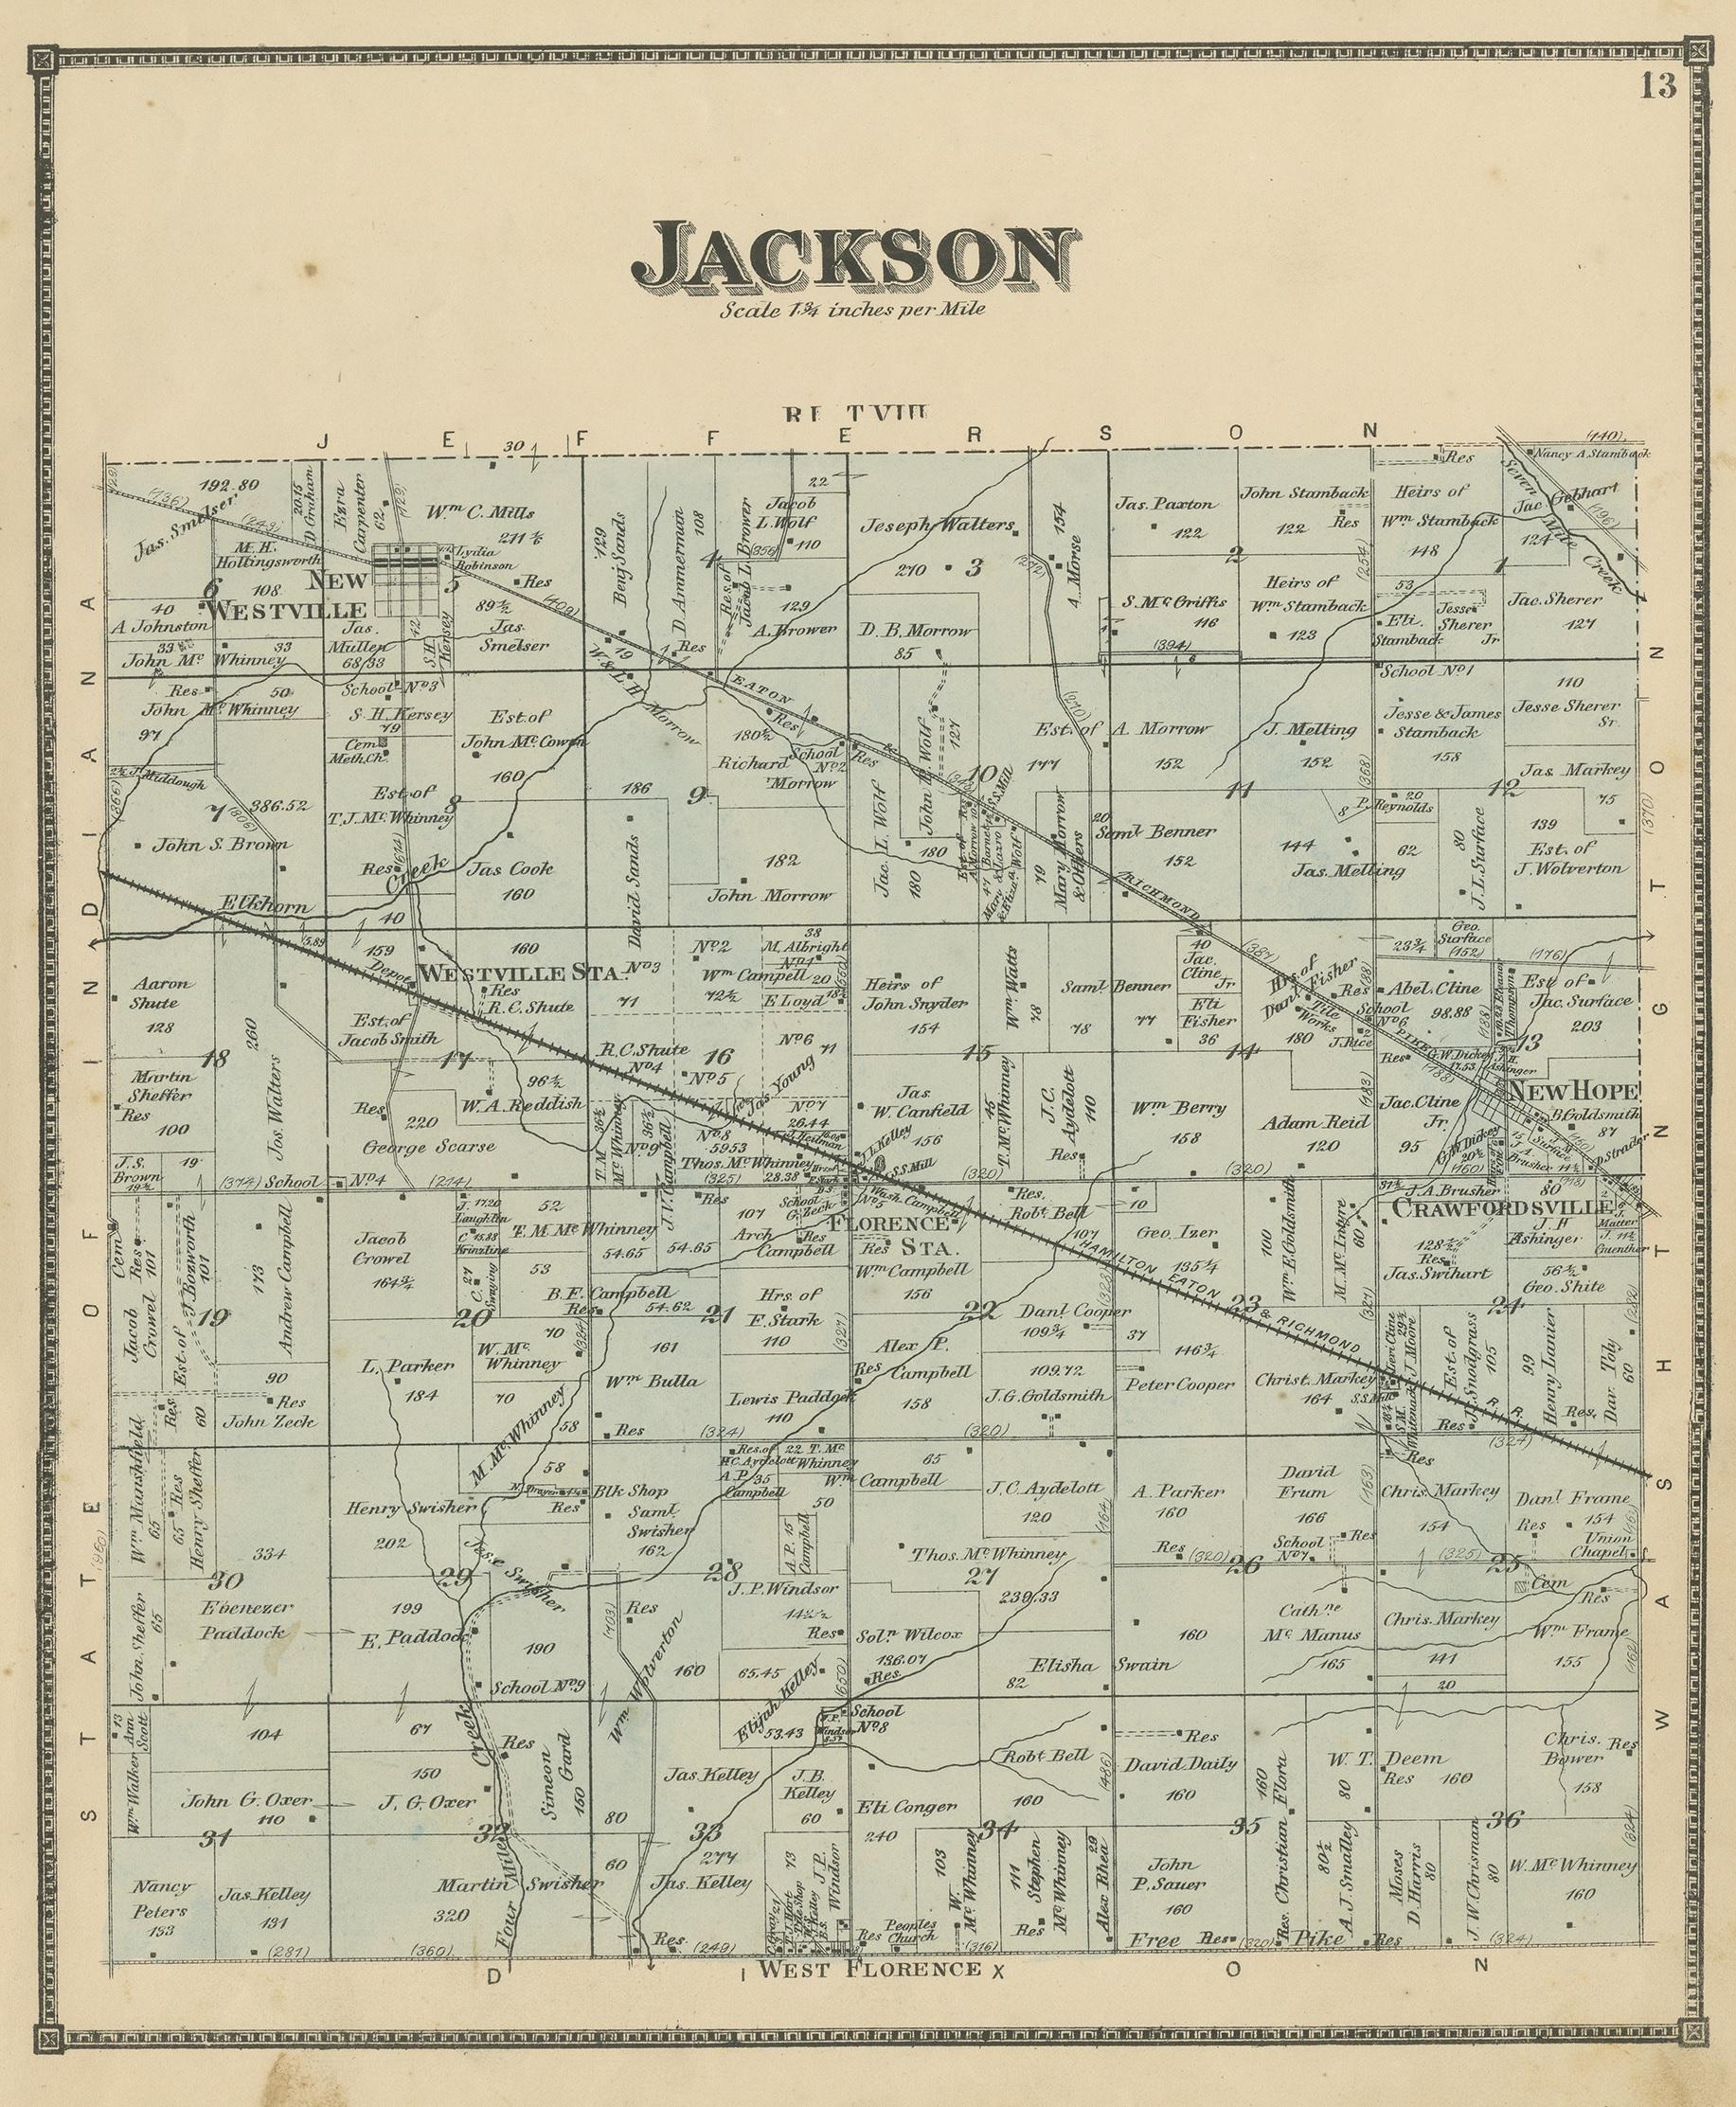 Antique map titled 'Jackson'. Original antique map of Jackson, Ohio. This map originates from 'Atlas of Preble County Ohio' by C.O. Titus. Published 1871.